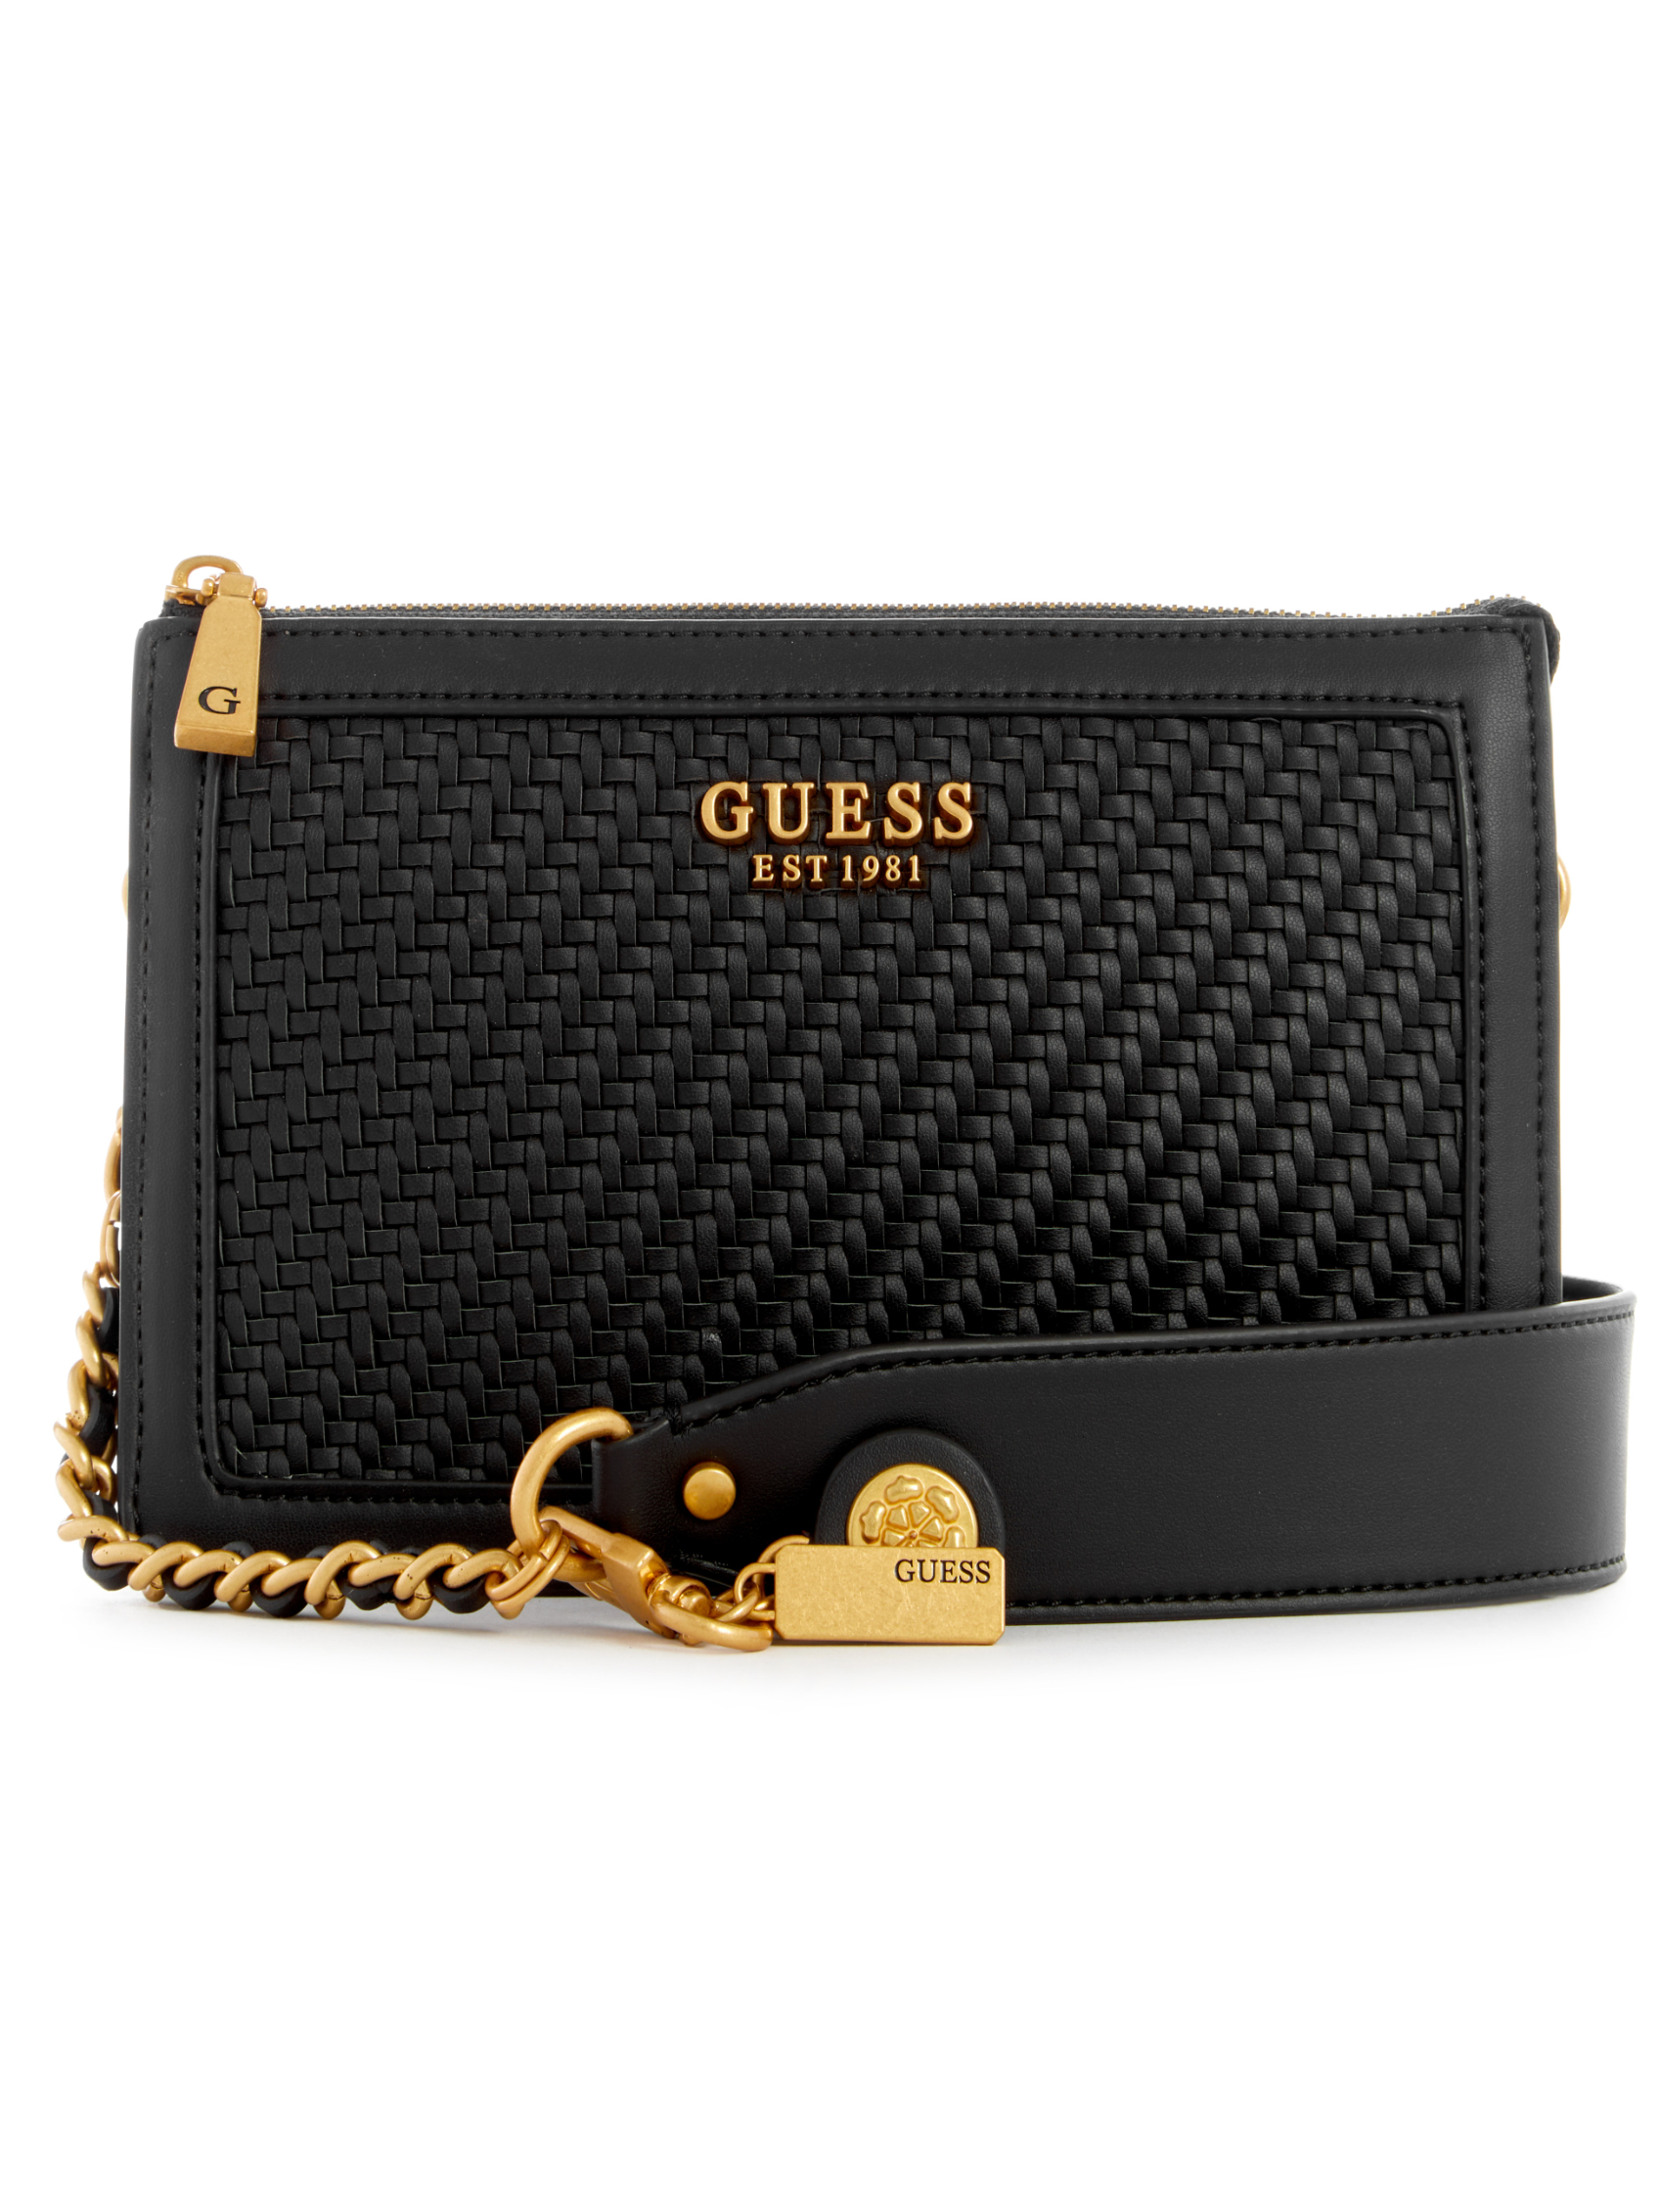 ABEY MULTI COMPARTMENT SHOULDER BAG | Guess Philippines